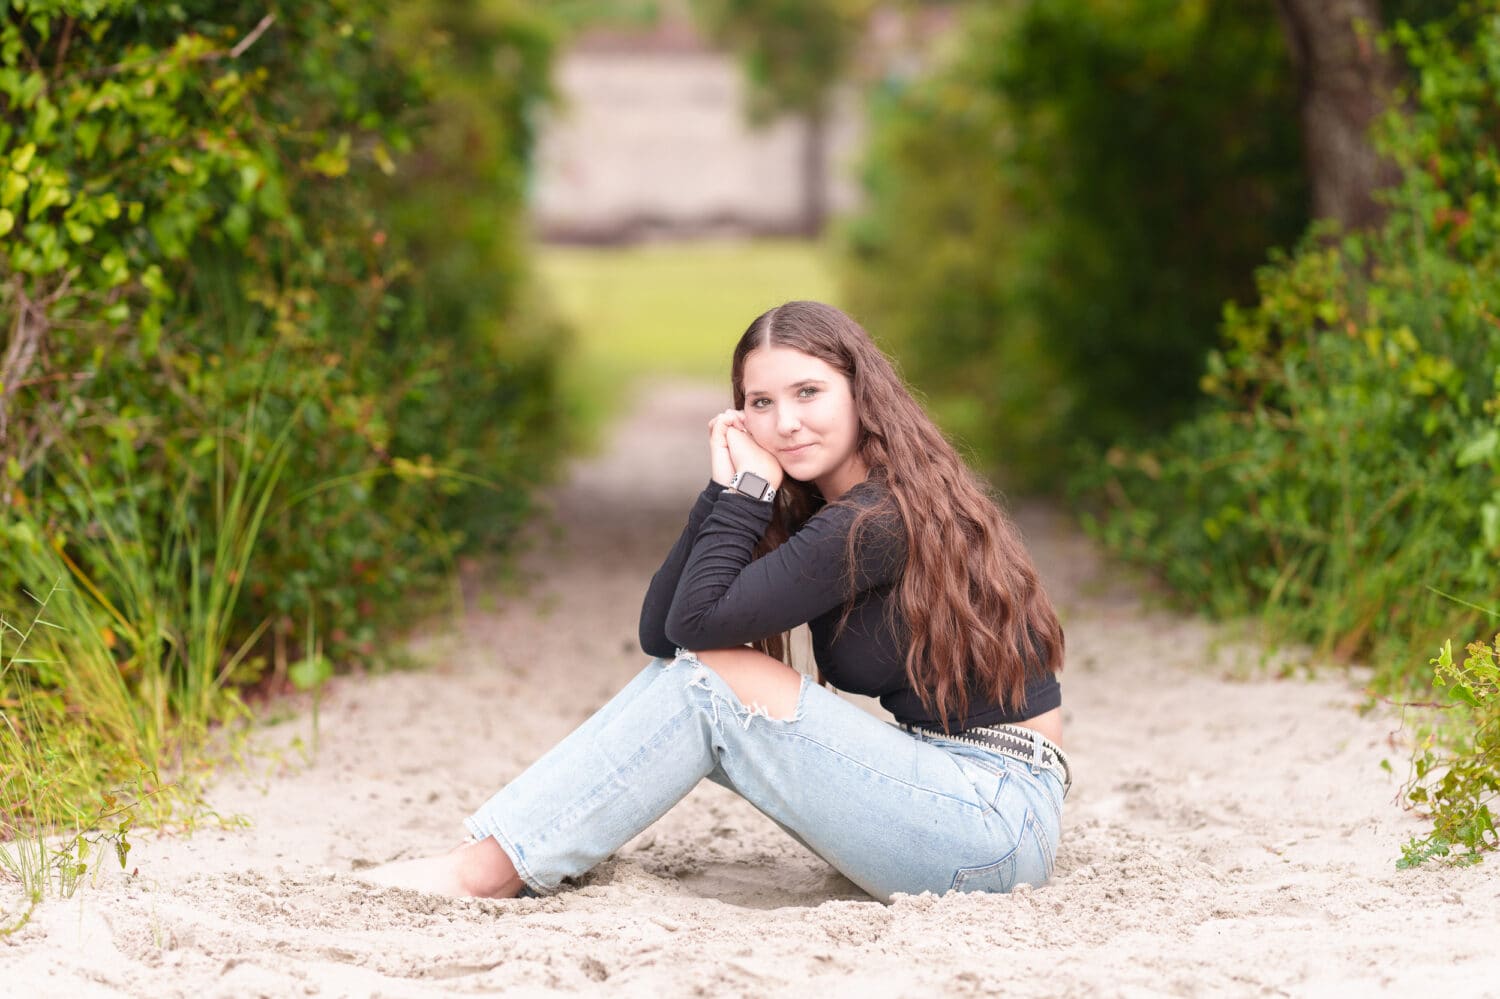 Senior girl leaning on her knees sitting in the sand - Huntington Beach State Park